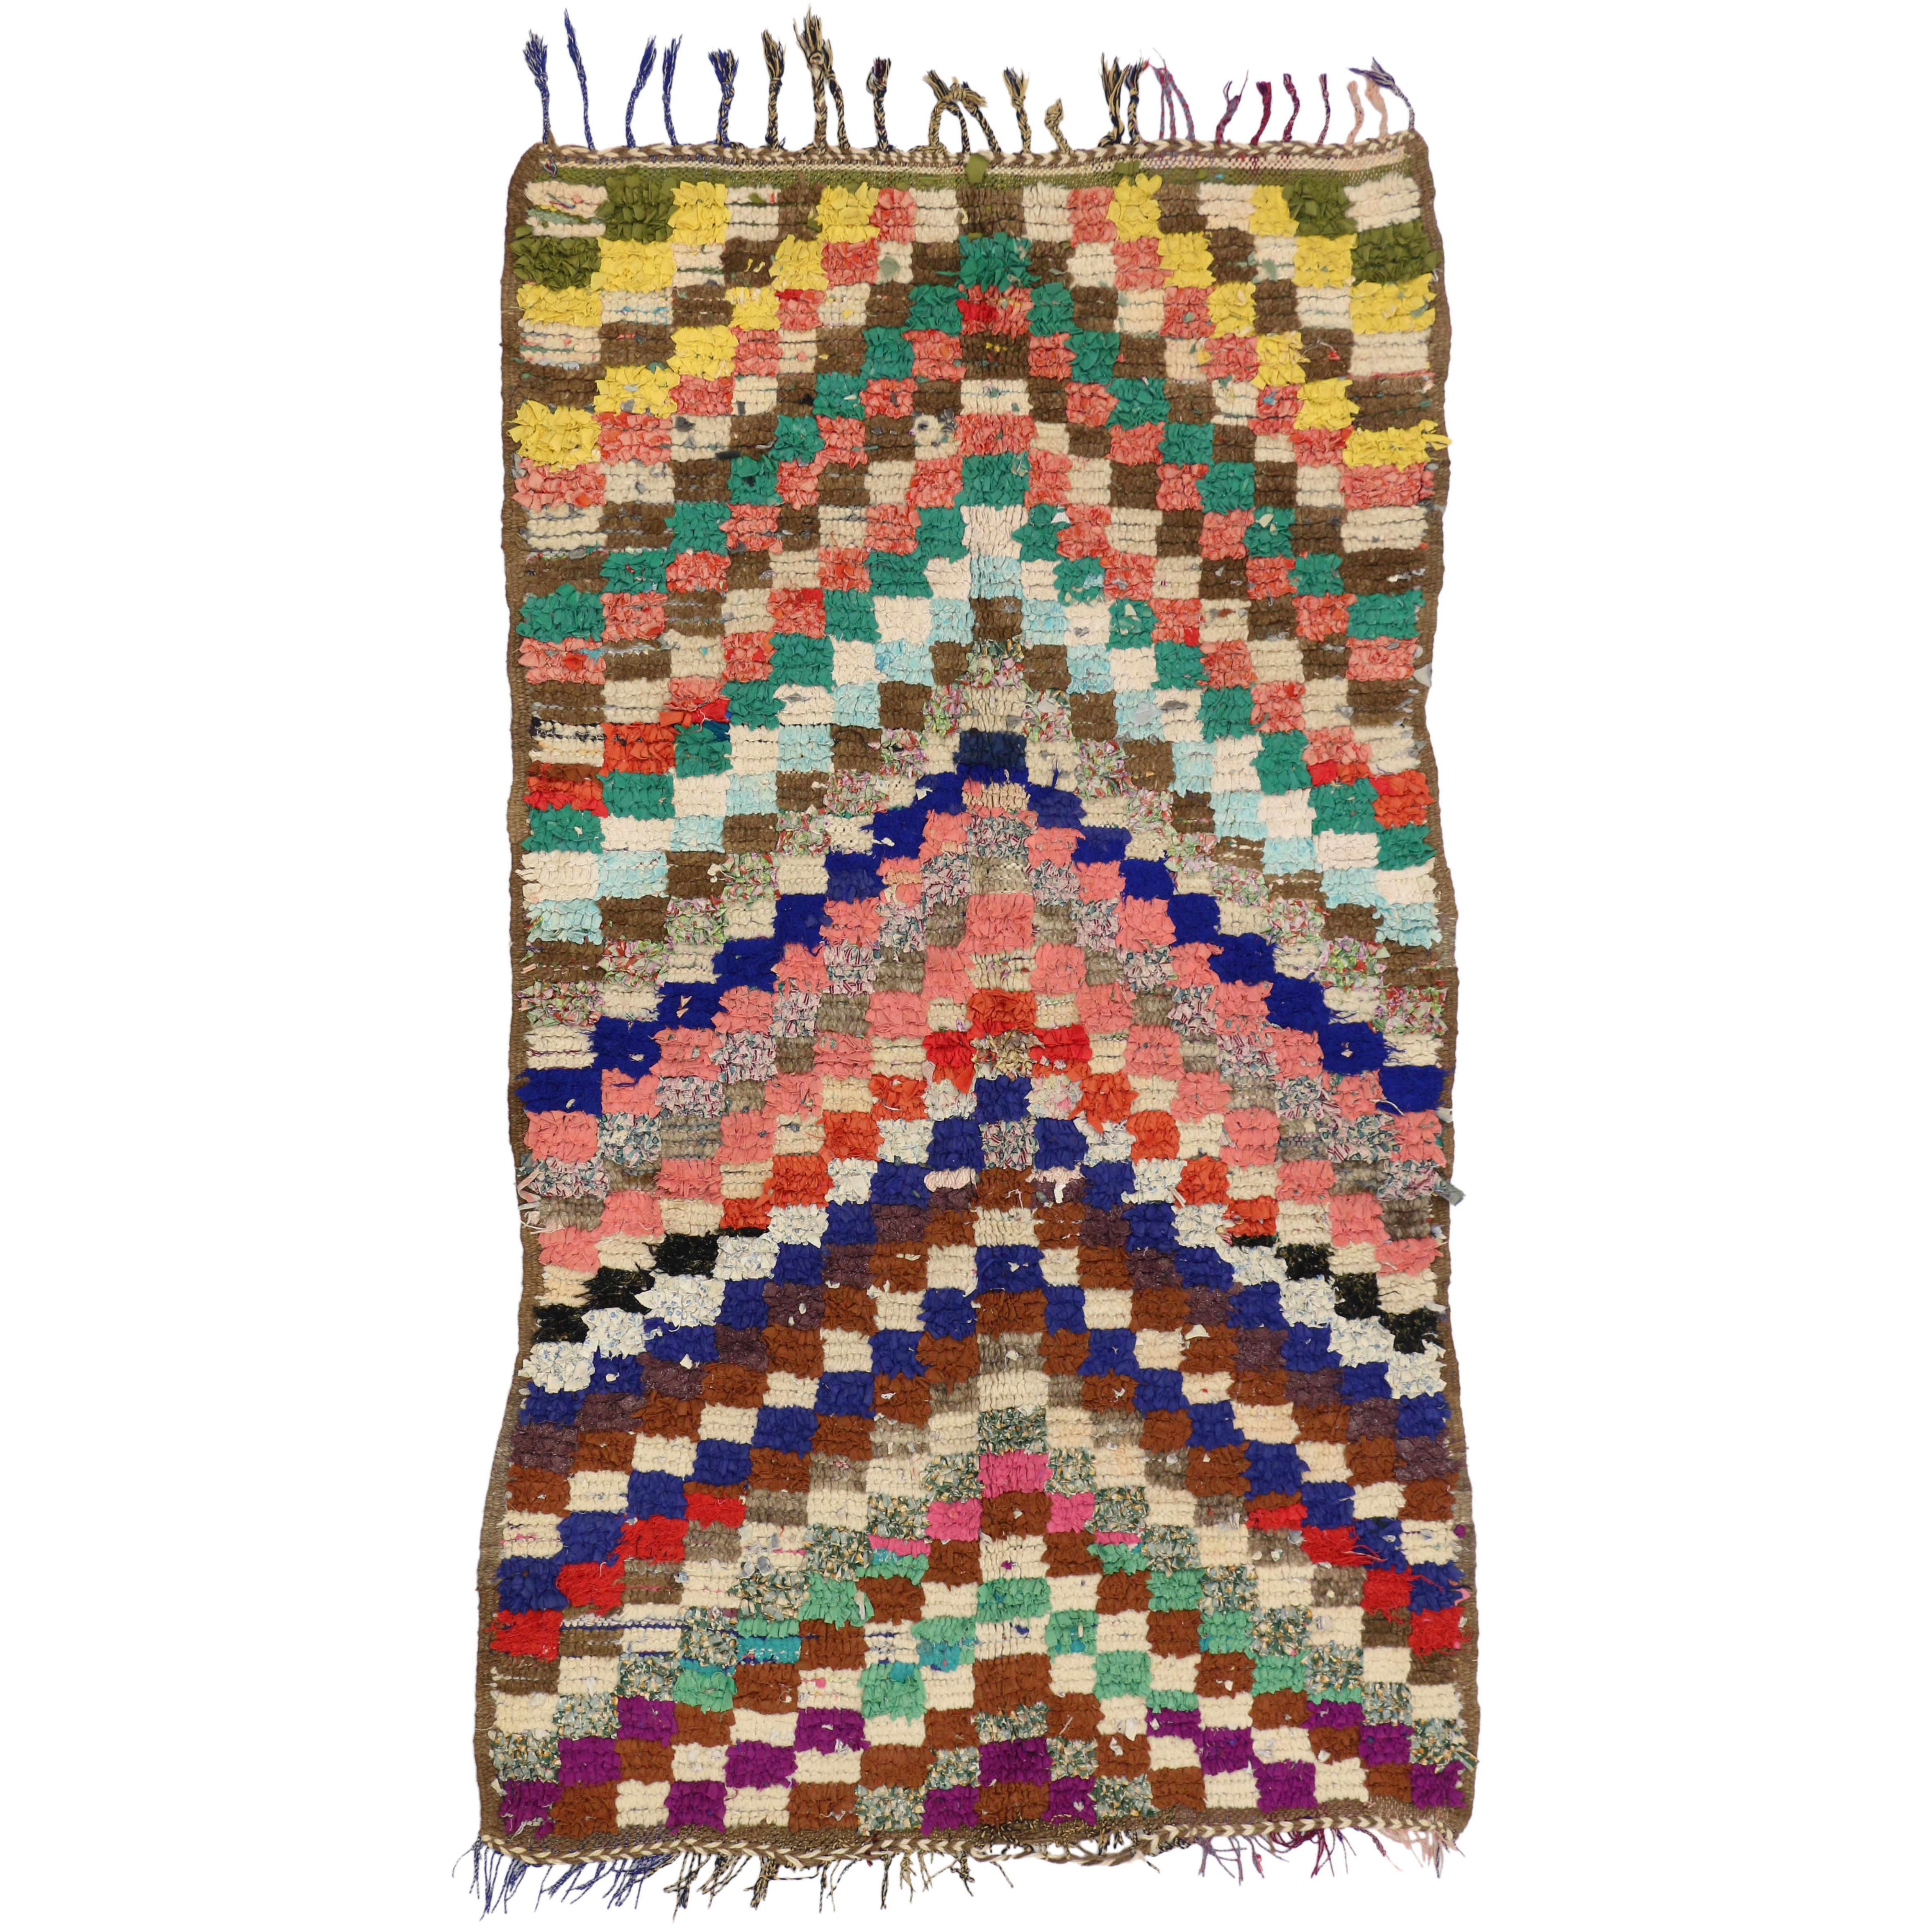 Colorful Vintage Berber Moroccan Boujad Rug with Post-Modern Cubism Style